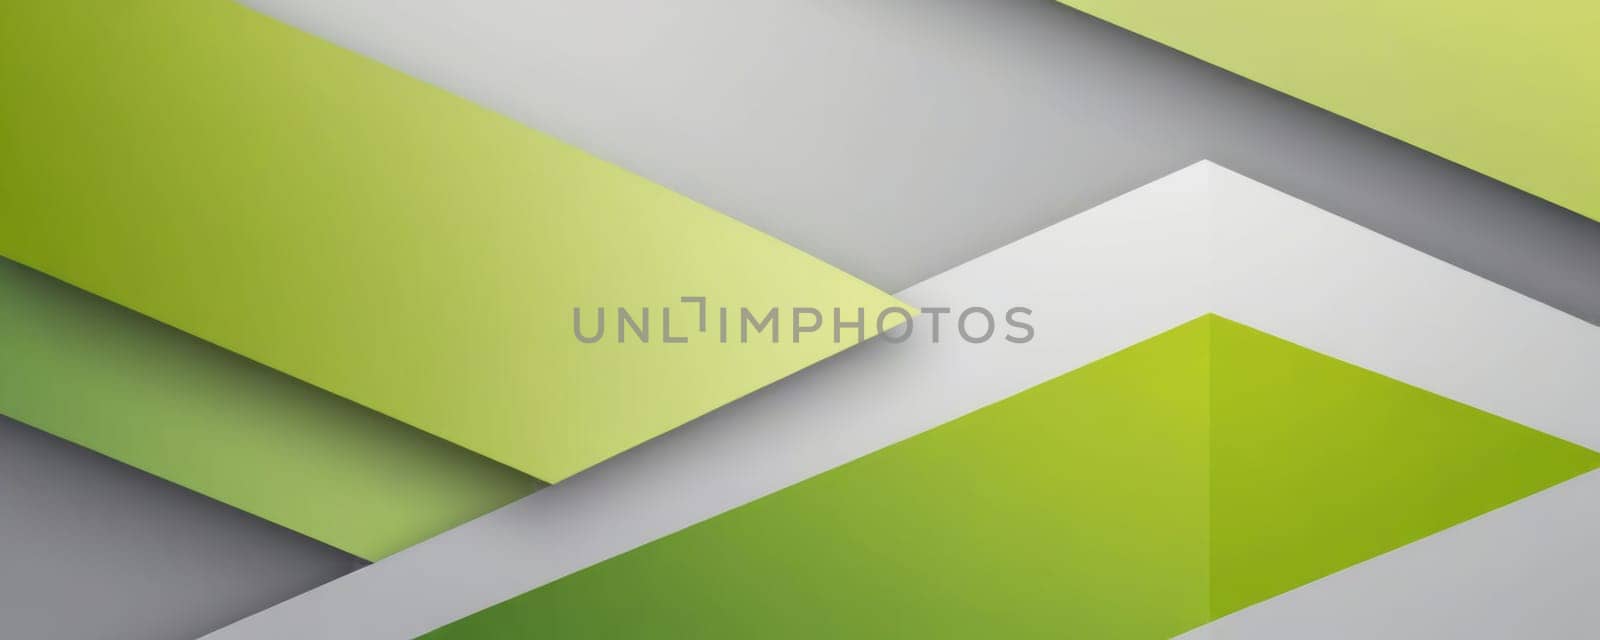 Angular Shapes in Lime and Lightgrey by nkotlyar